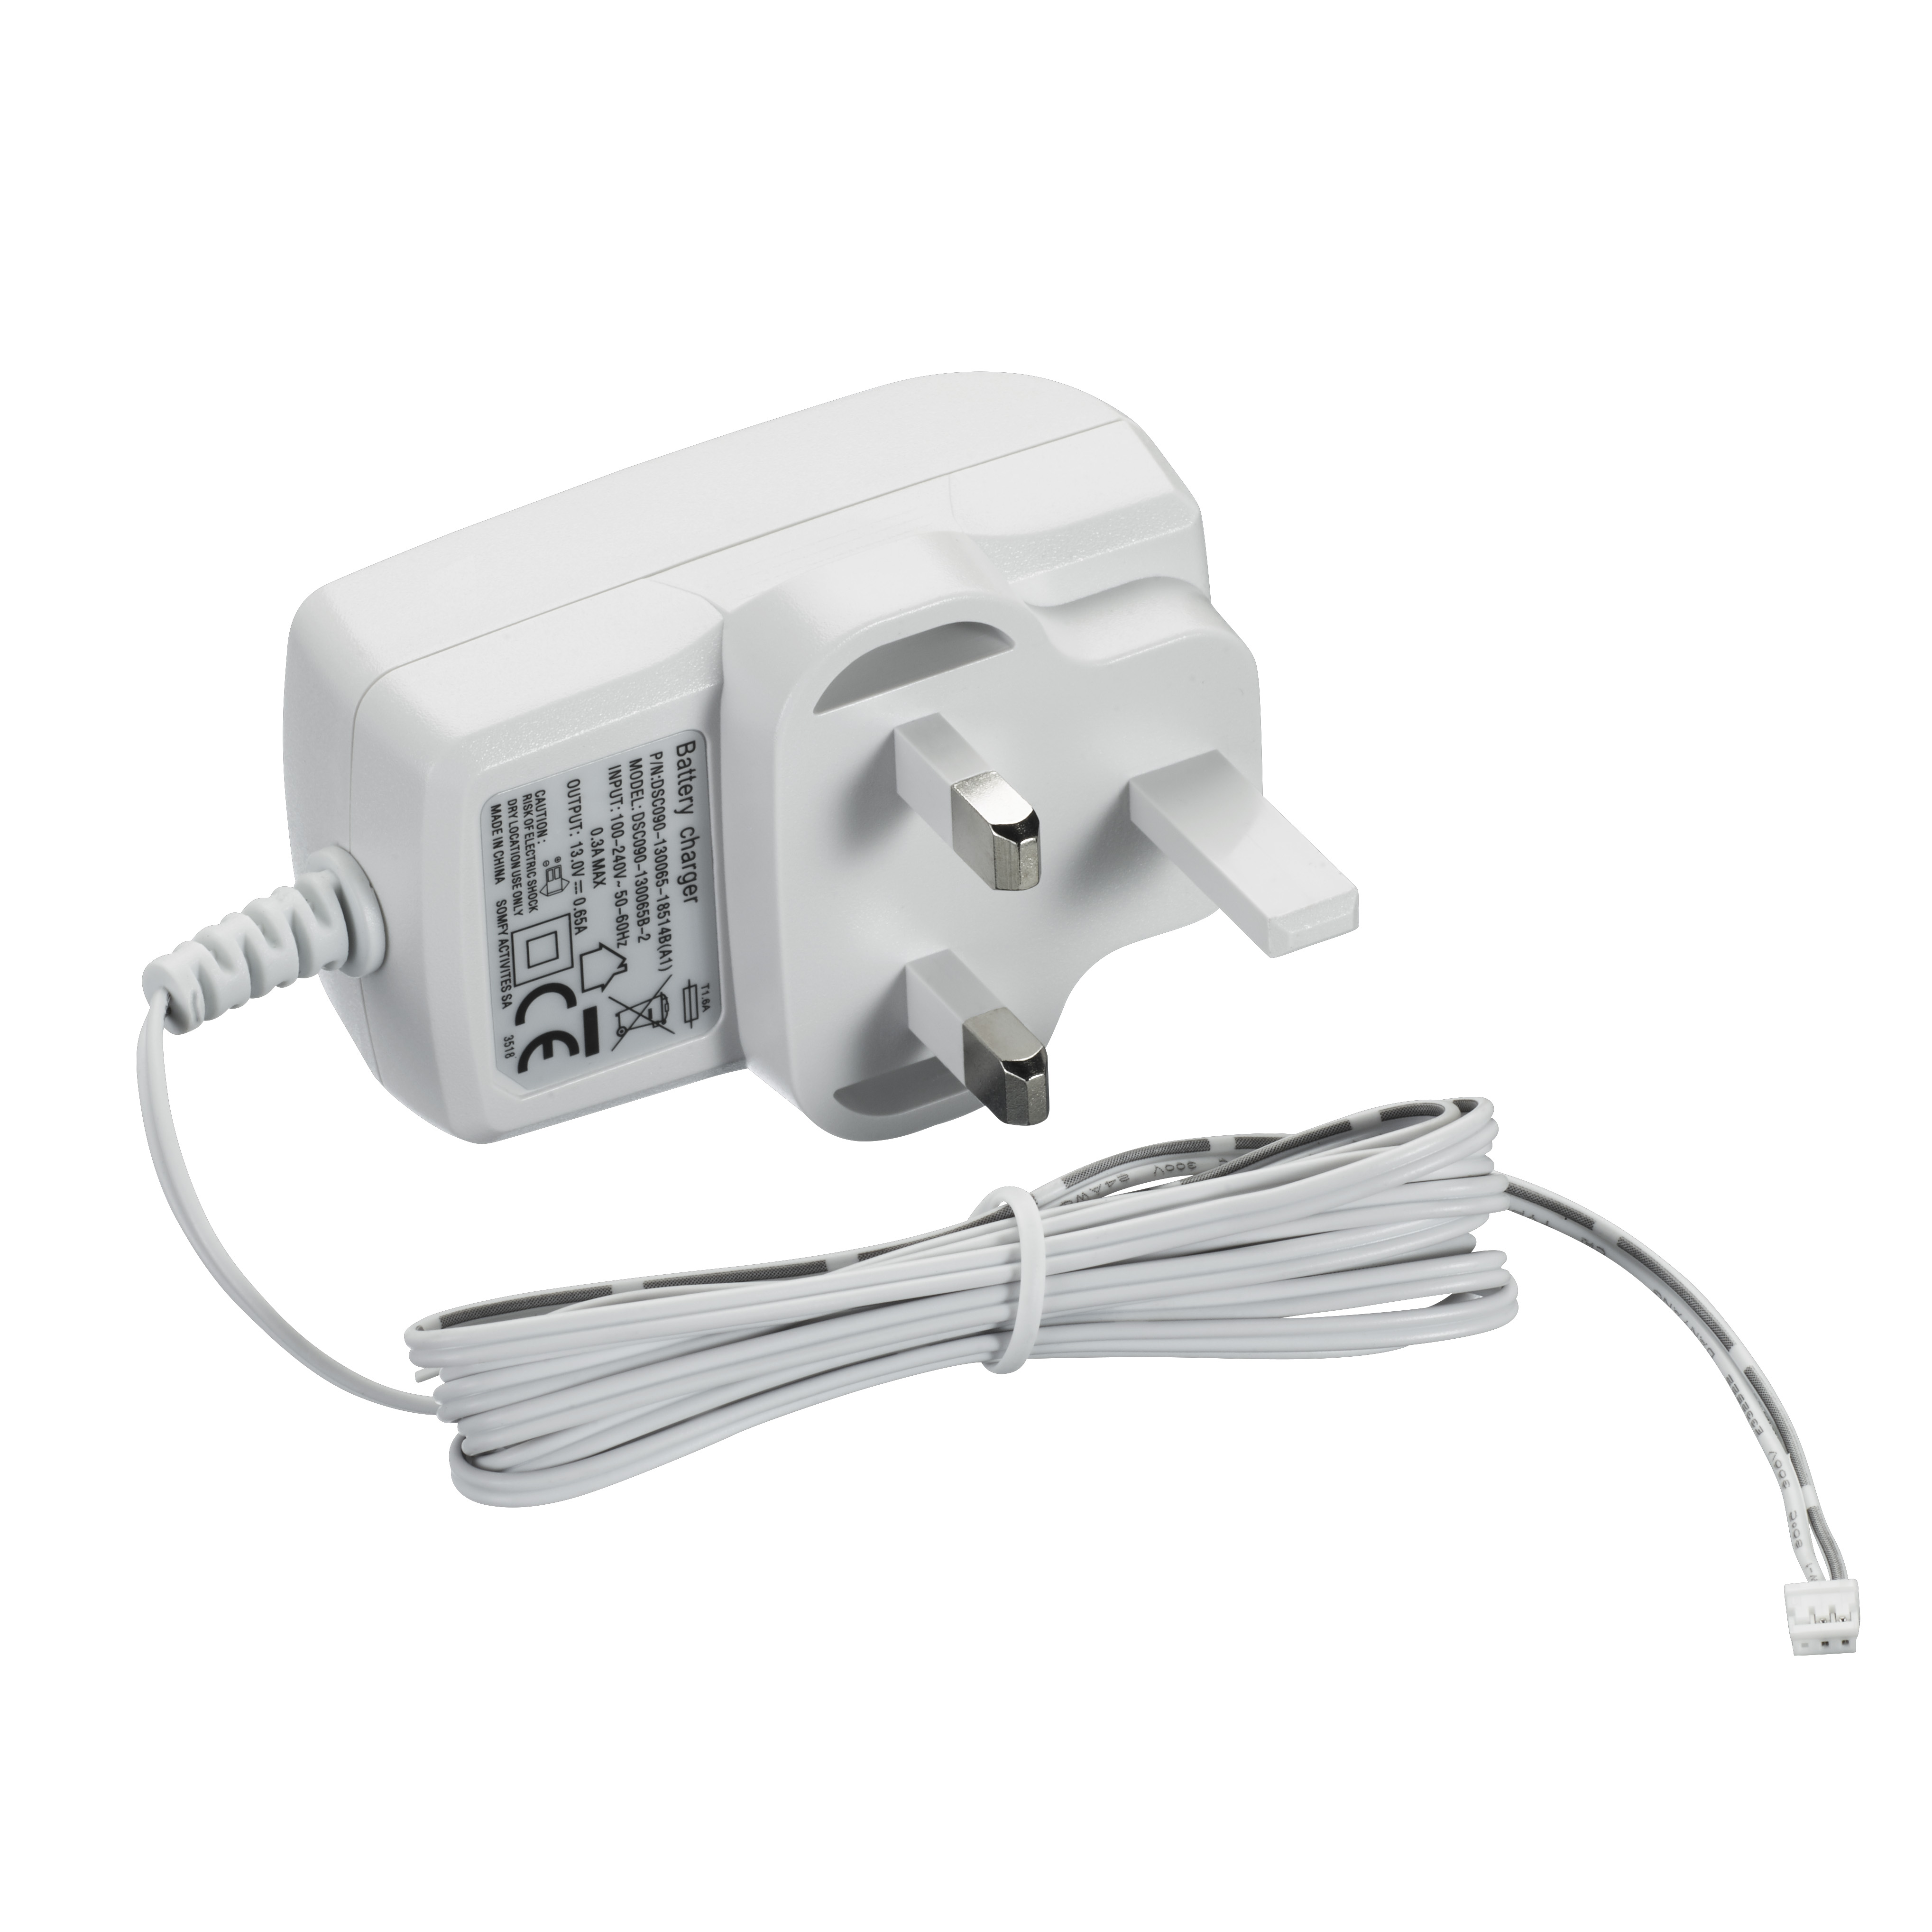 An image of Blind Battery Charger